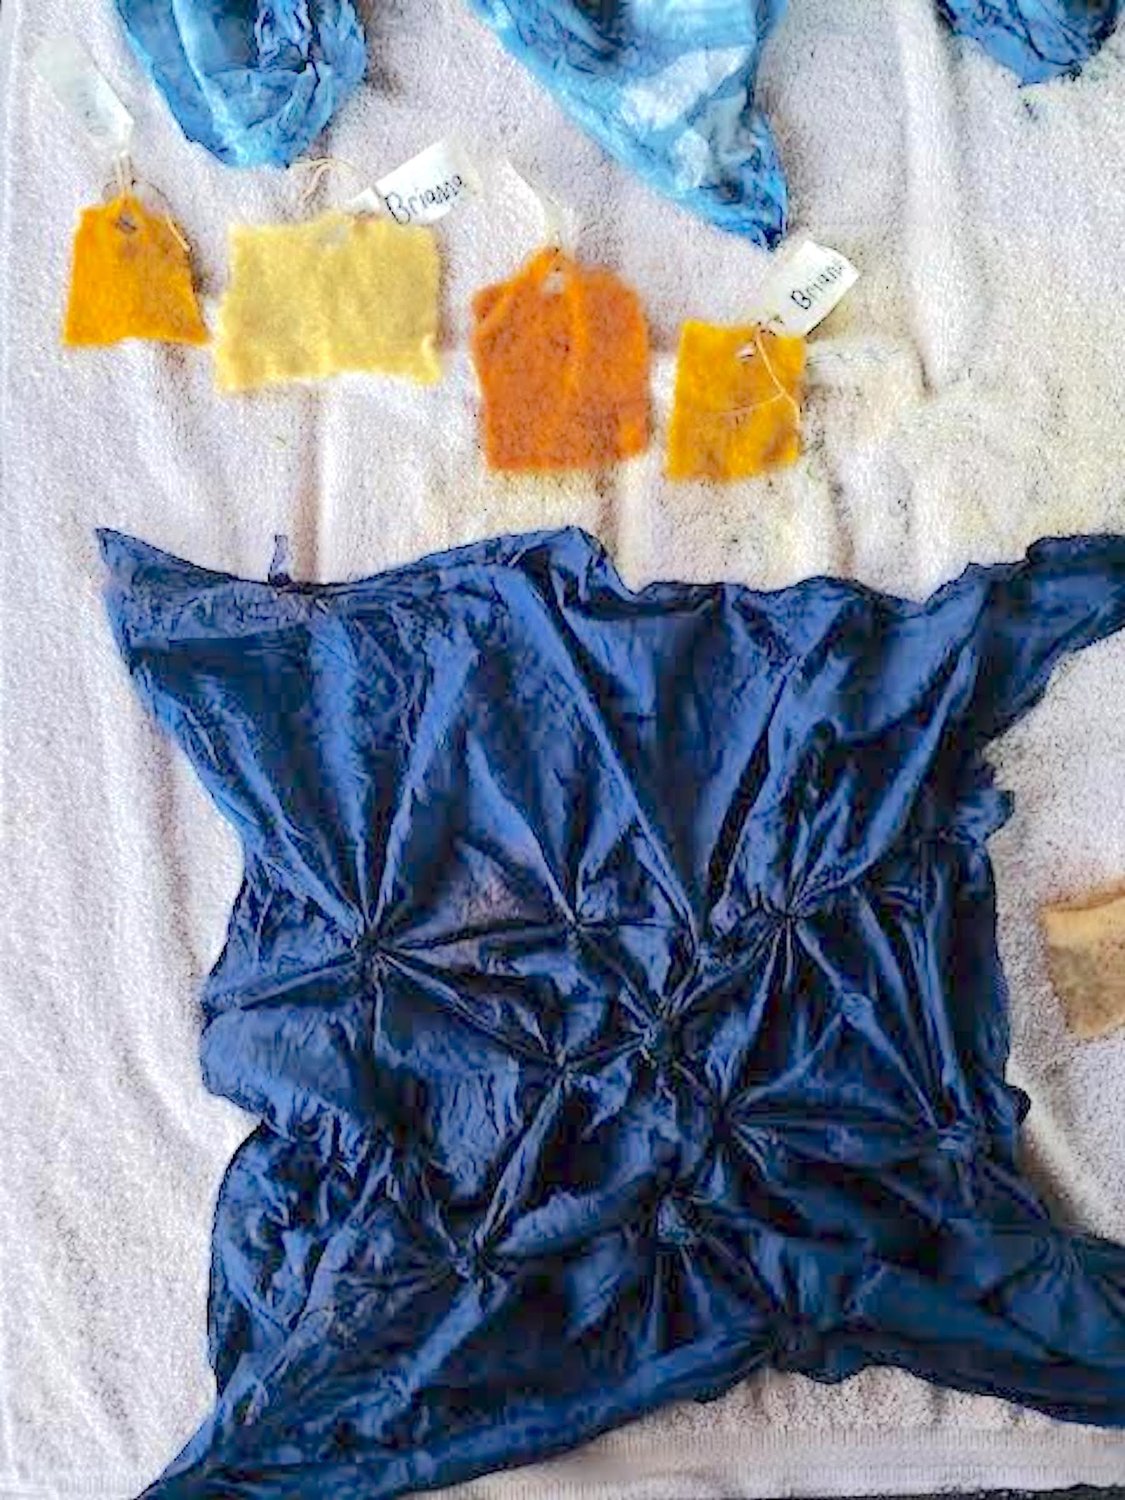 Natural Dyeing Lab will be held on Sunday, Sept. 25, from noon to 4 p.m.